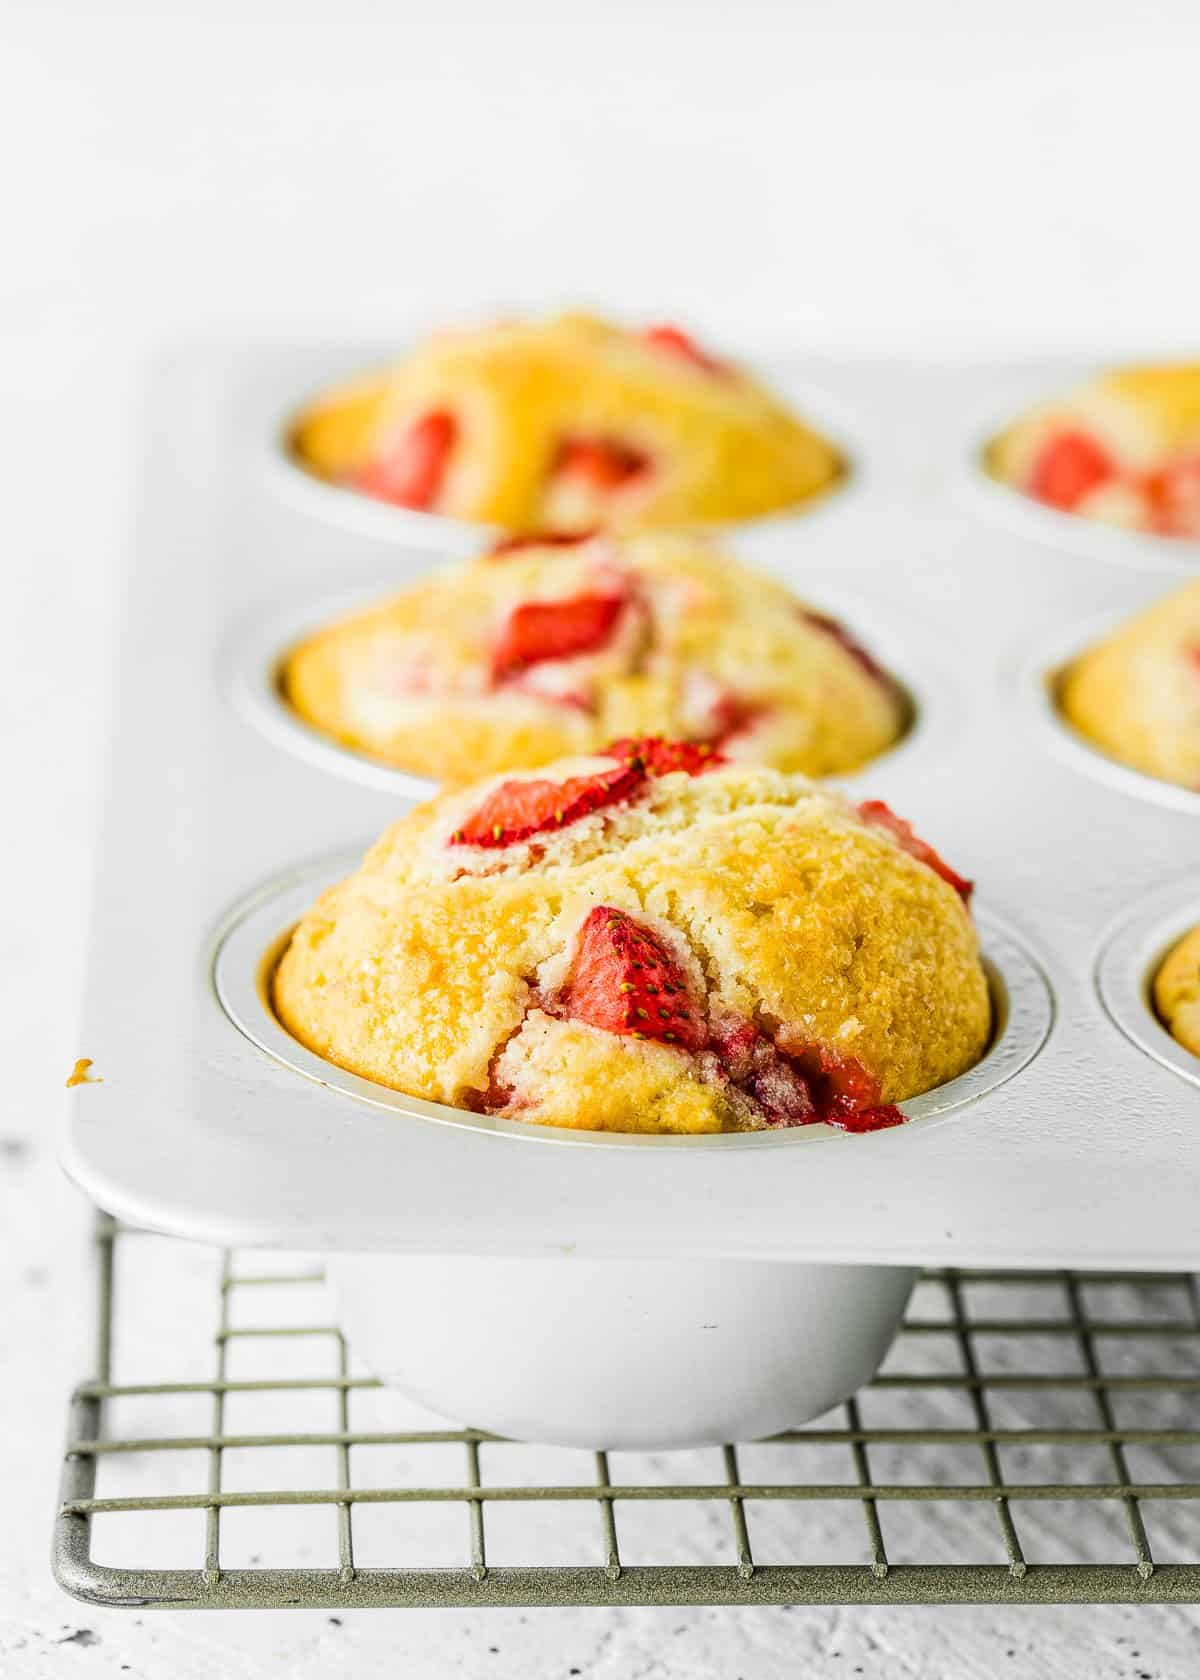 baked egg-free strawberry muffins in a muffin pan over a cooling rack.